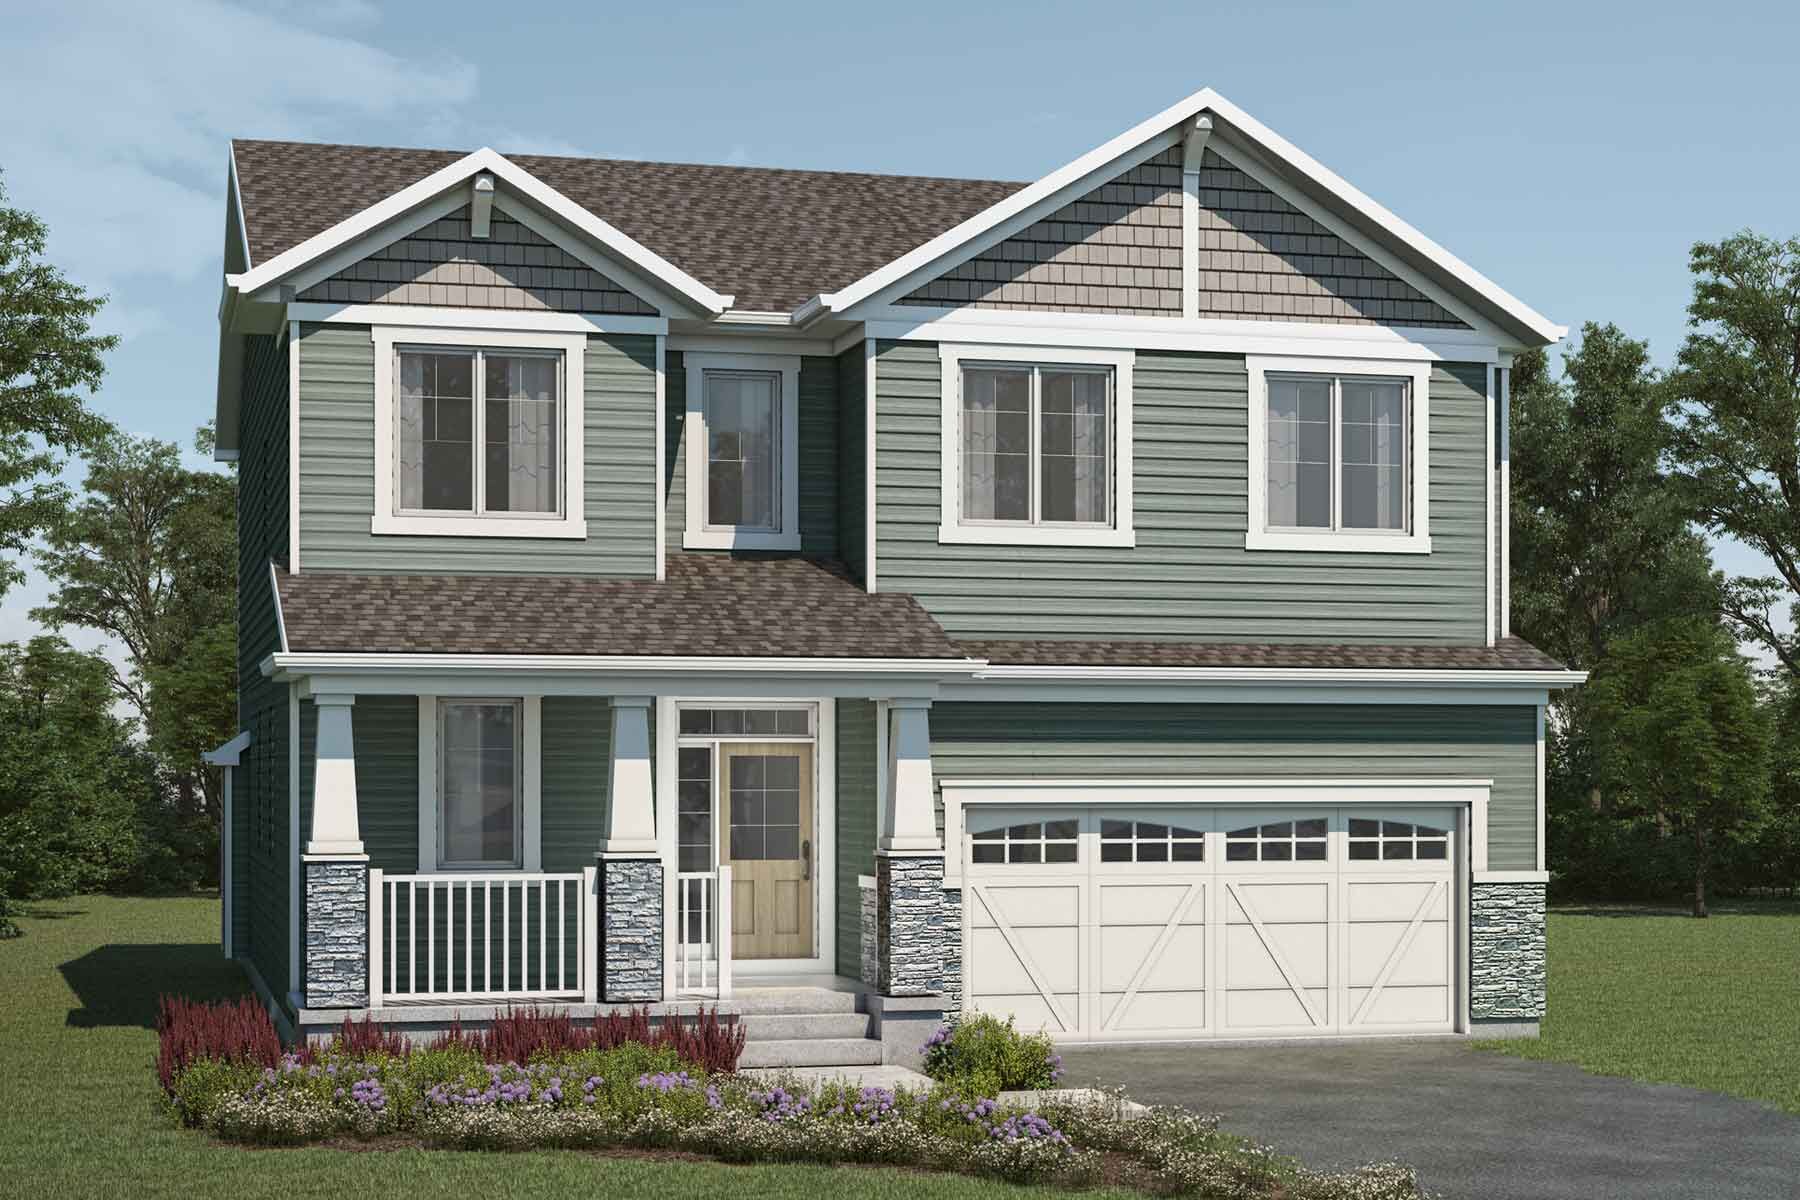 A detached Craftsman style home with a double car garage.